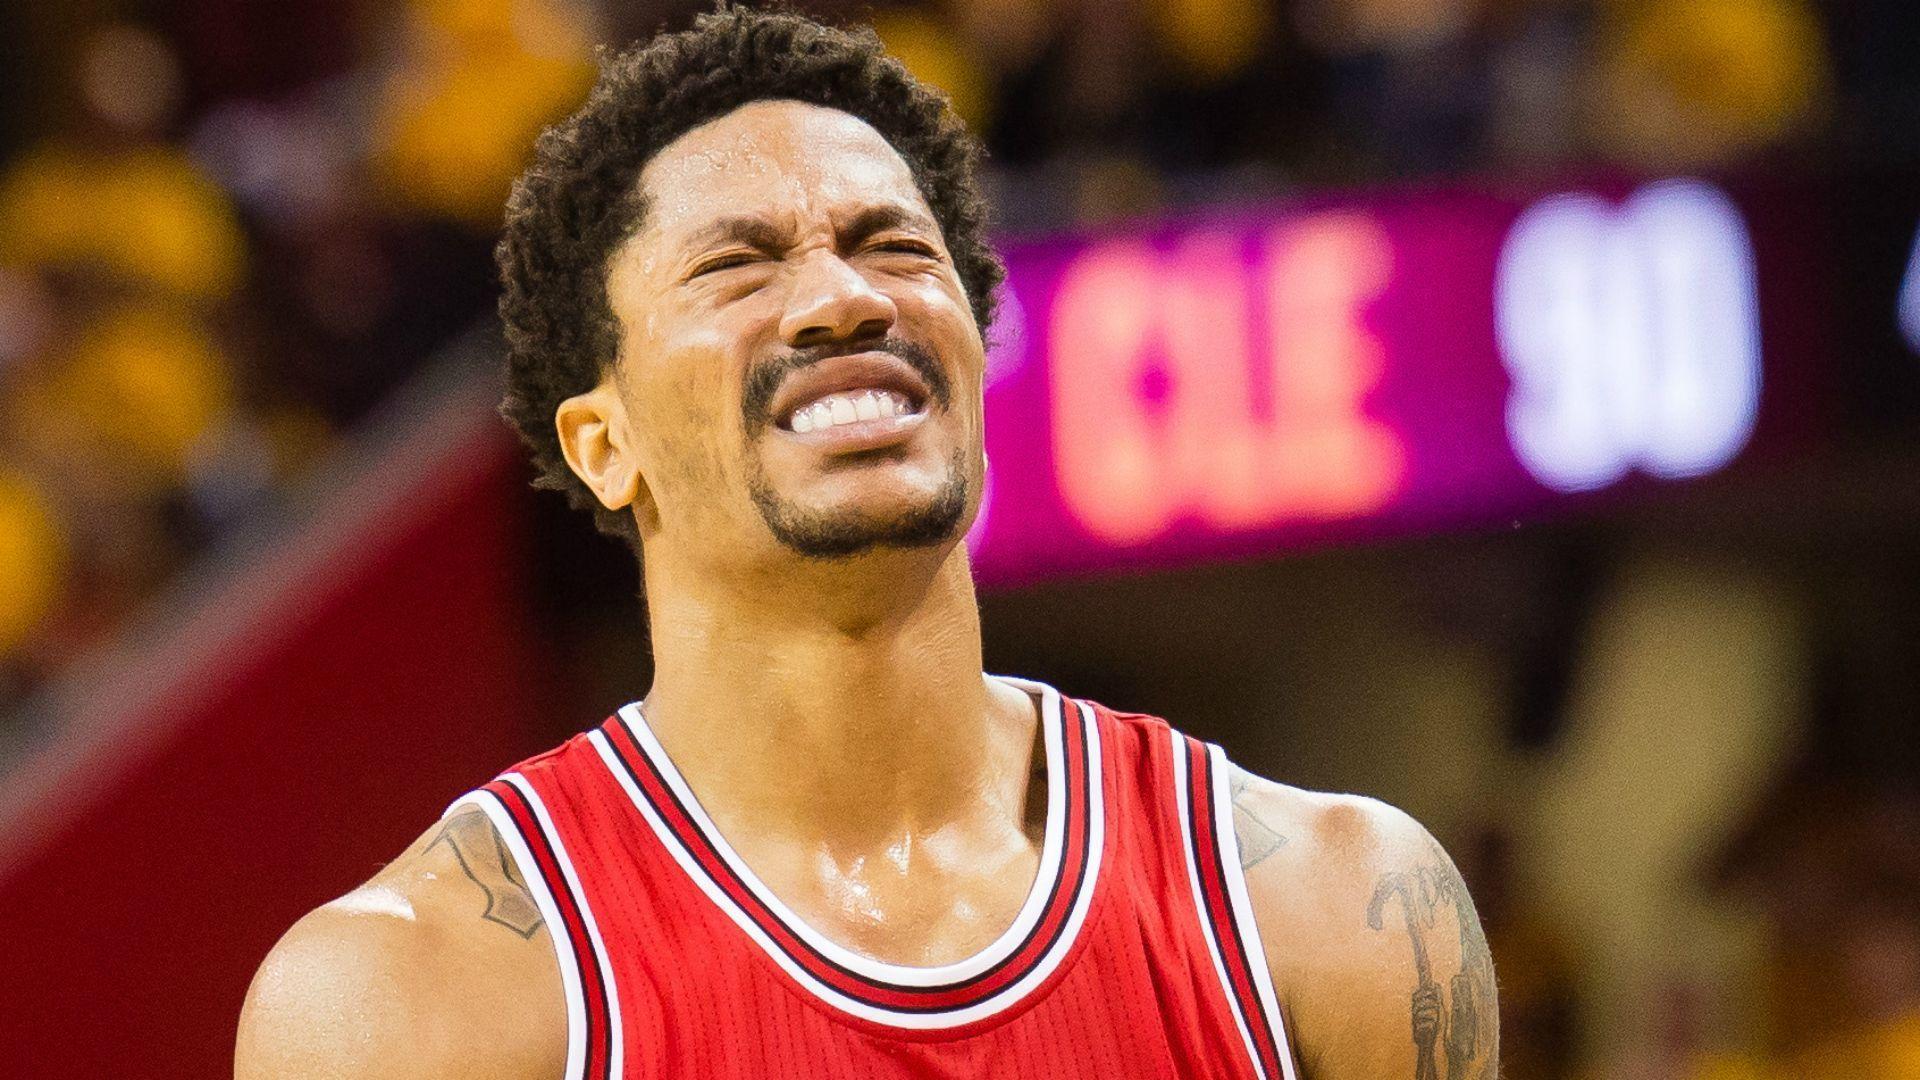 Derrick Rose set to return in two weeks after surgery. NBA